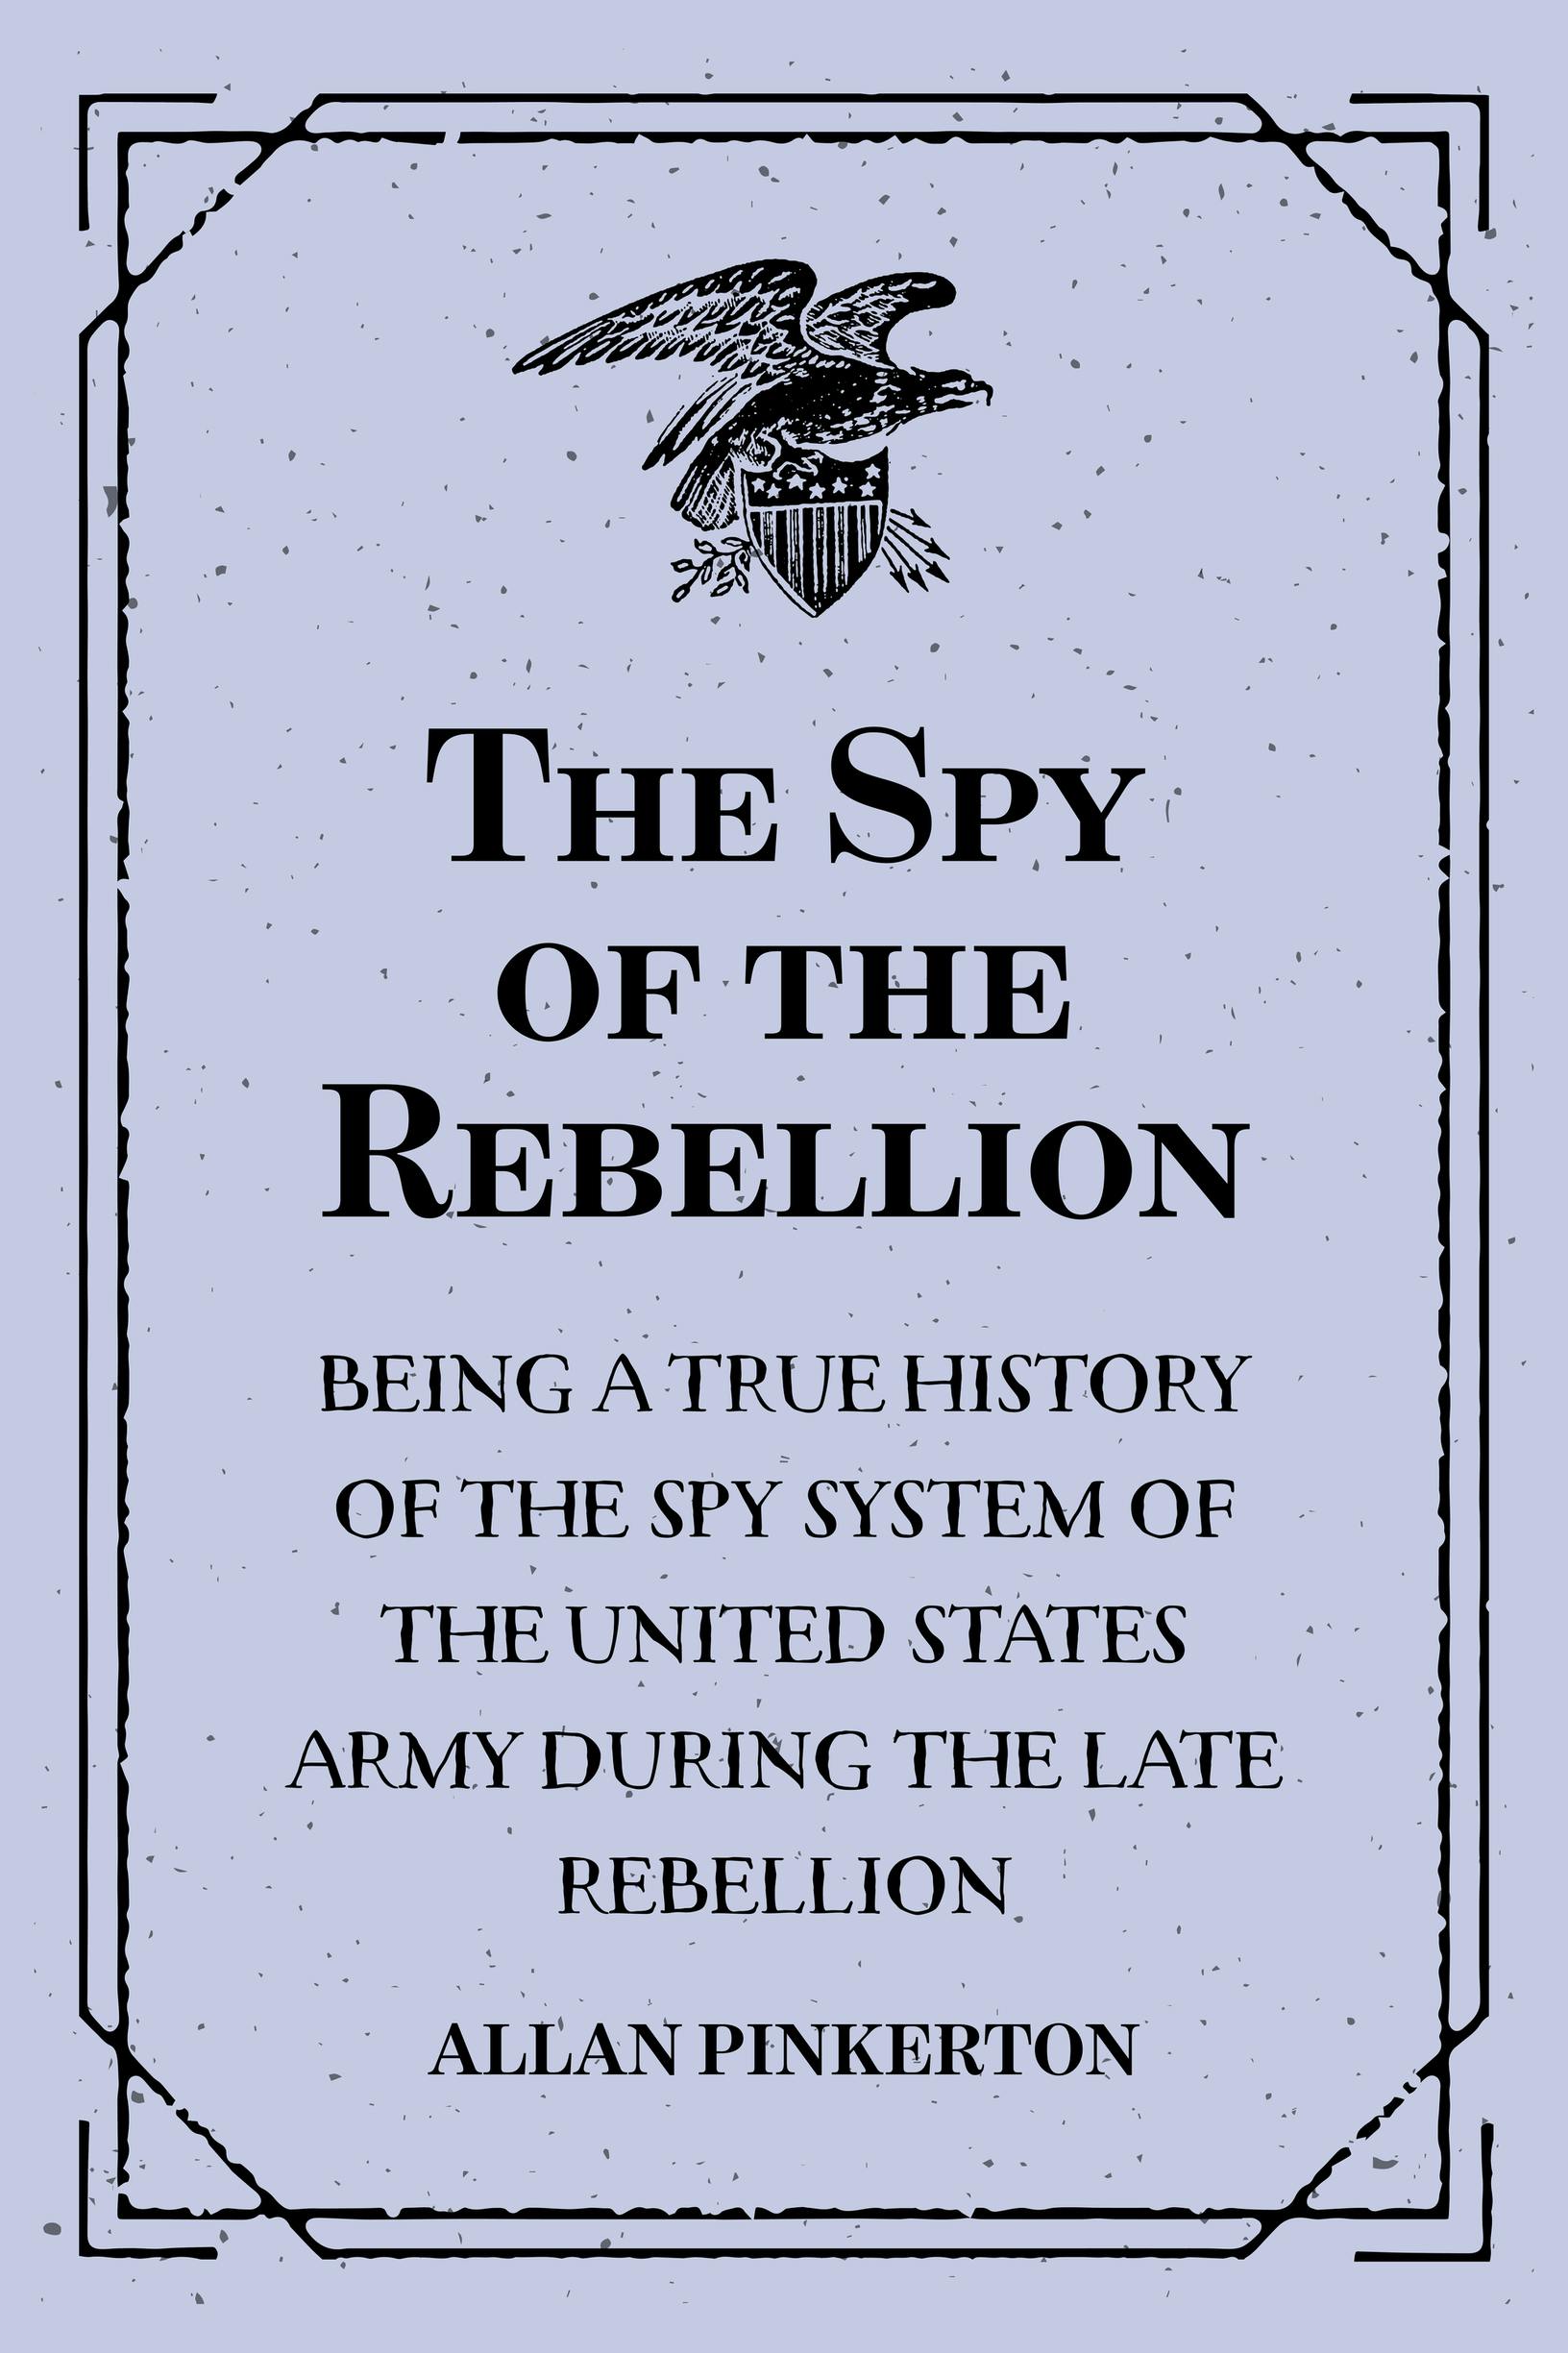 The Spy of the Rebellion : Being a True History of the Spy System of the United States Army during the Late Rebellion - Allan Pinkerton